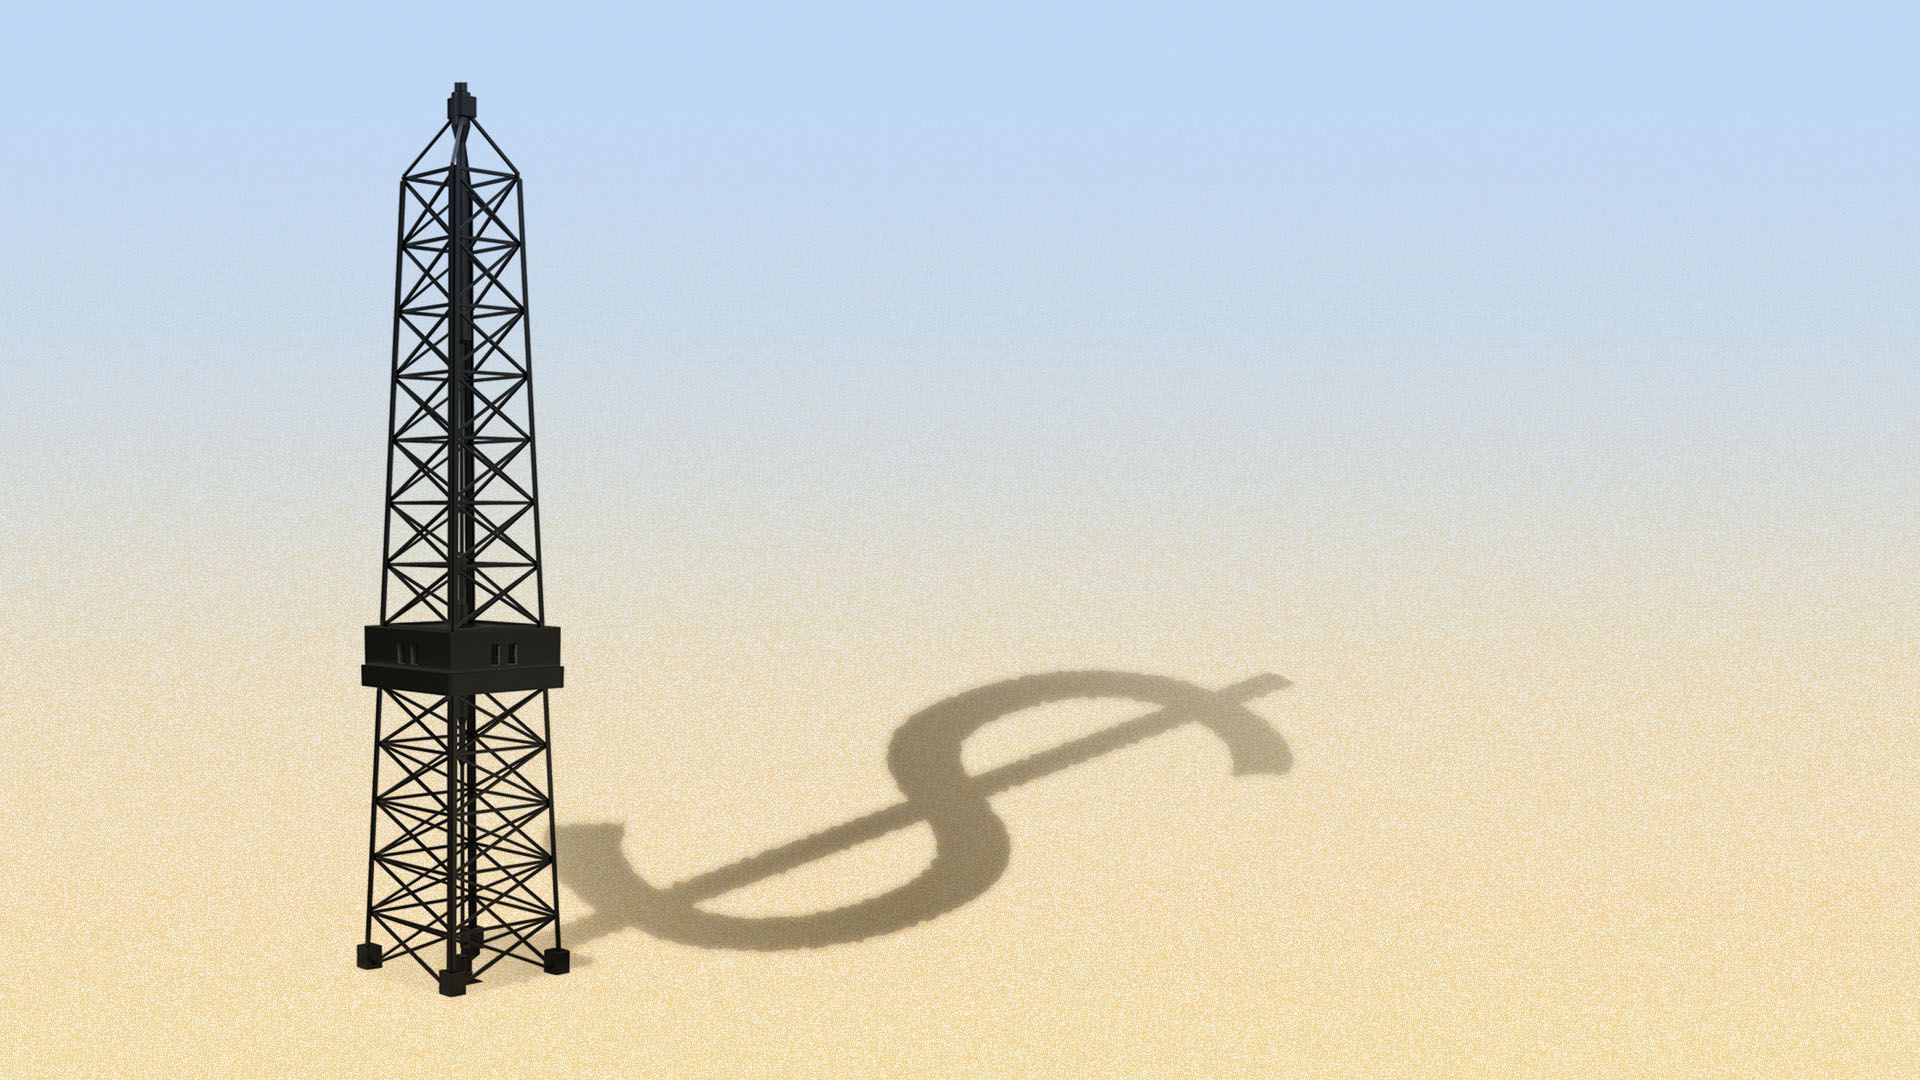 Illustration of a wired tower with a dollar sign as its shadow